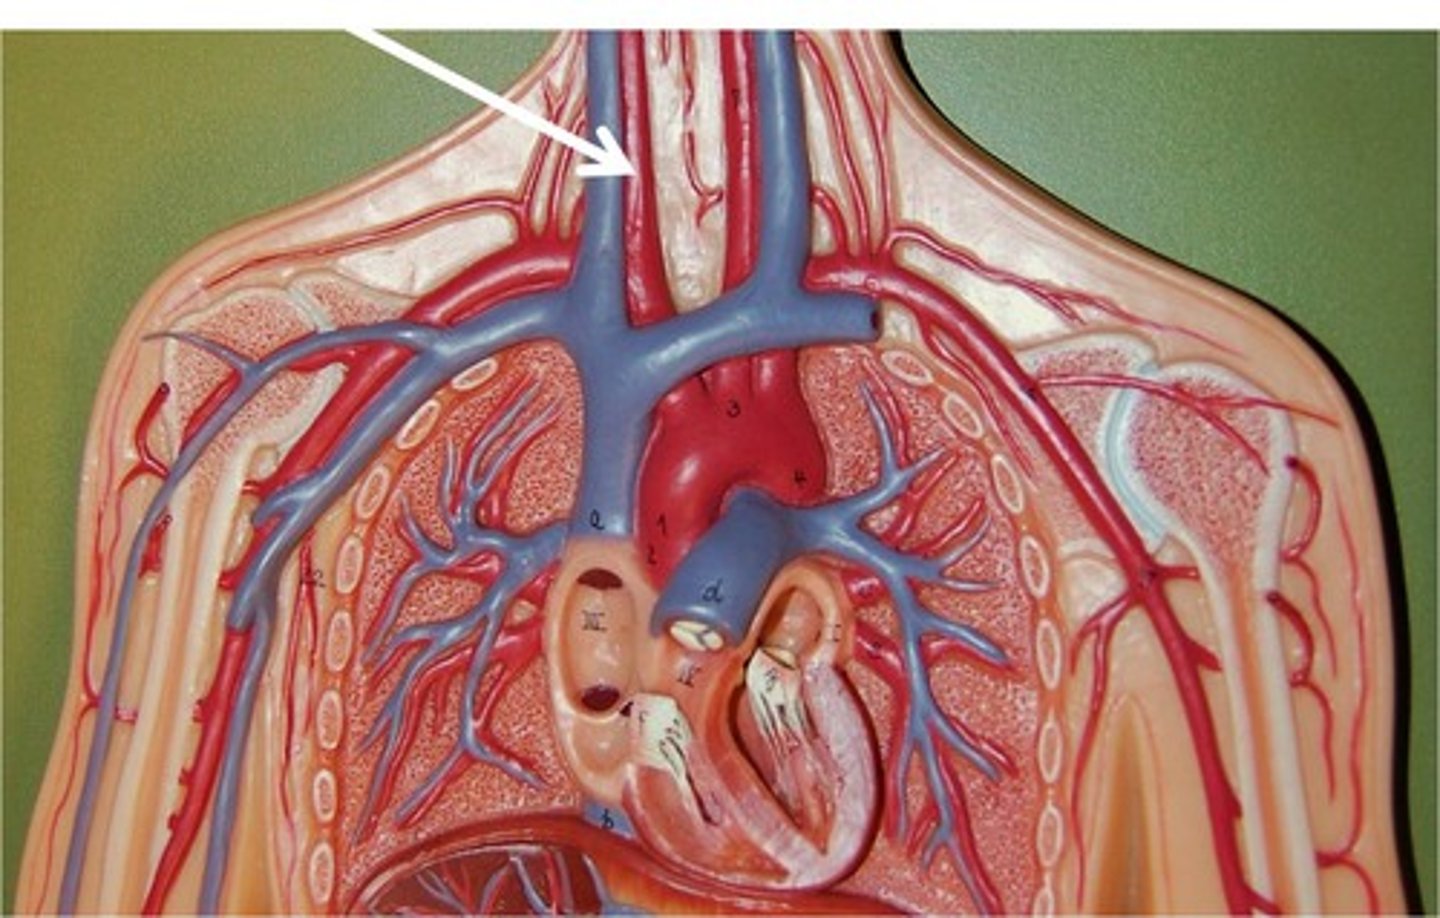 <p>Main arteries that supply blood to the head, face, and neck.</p>